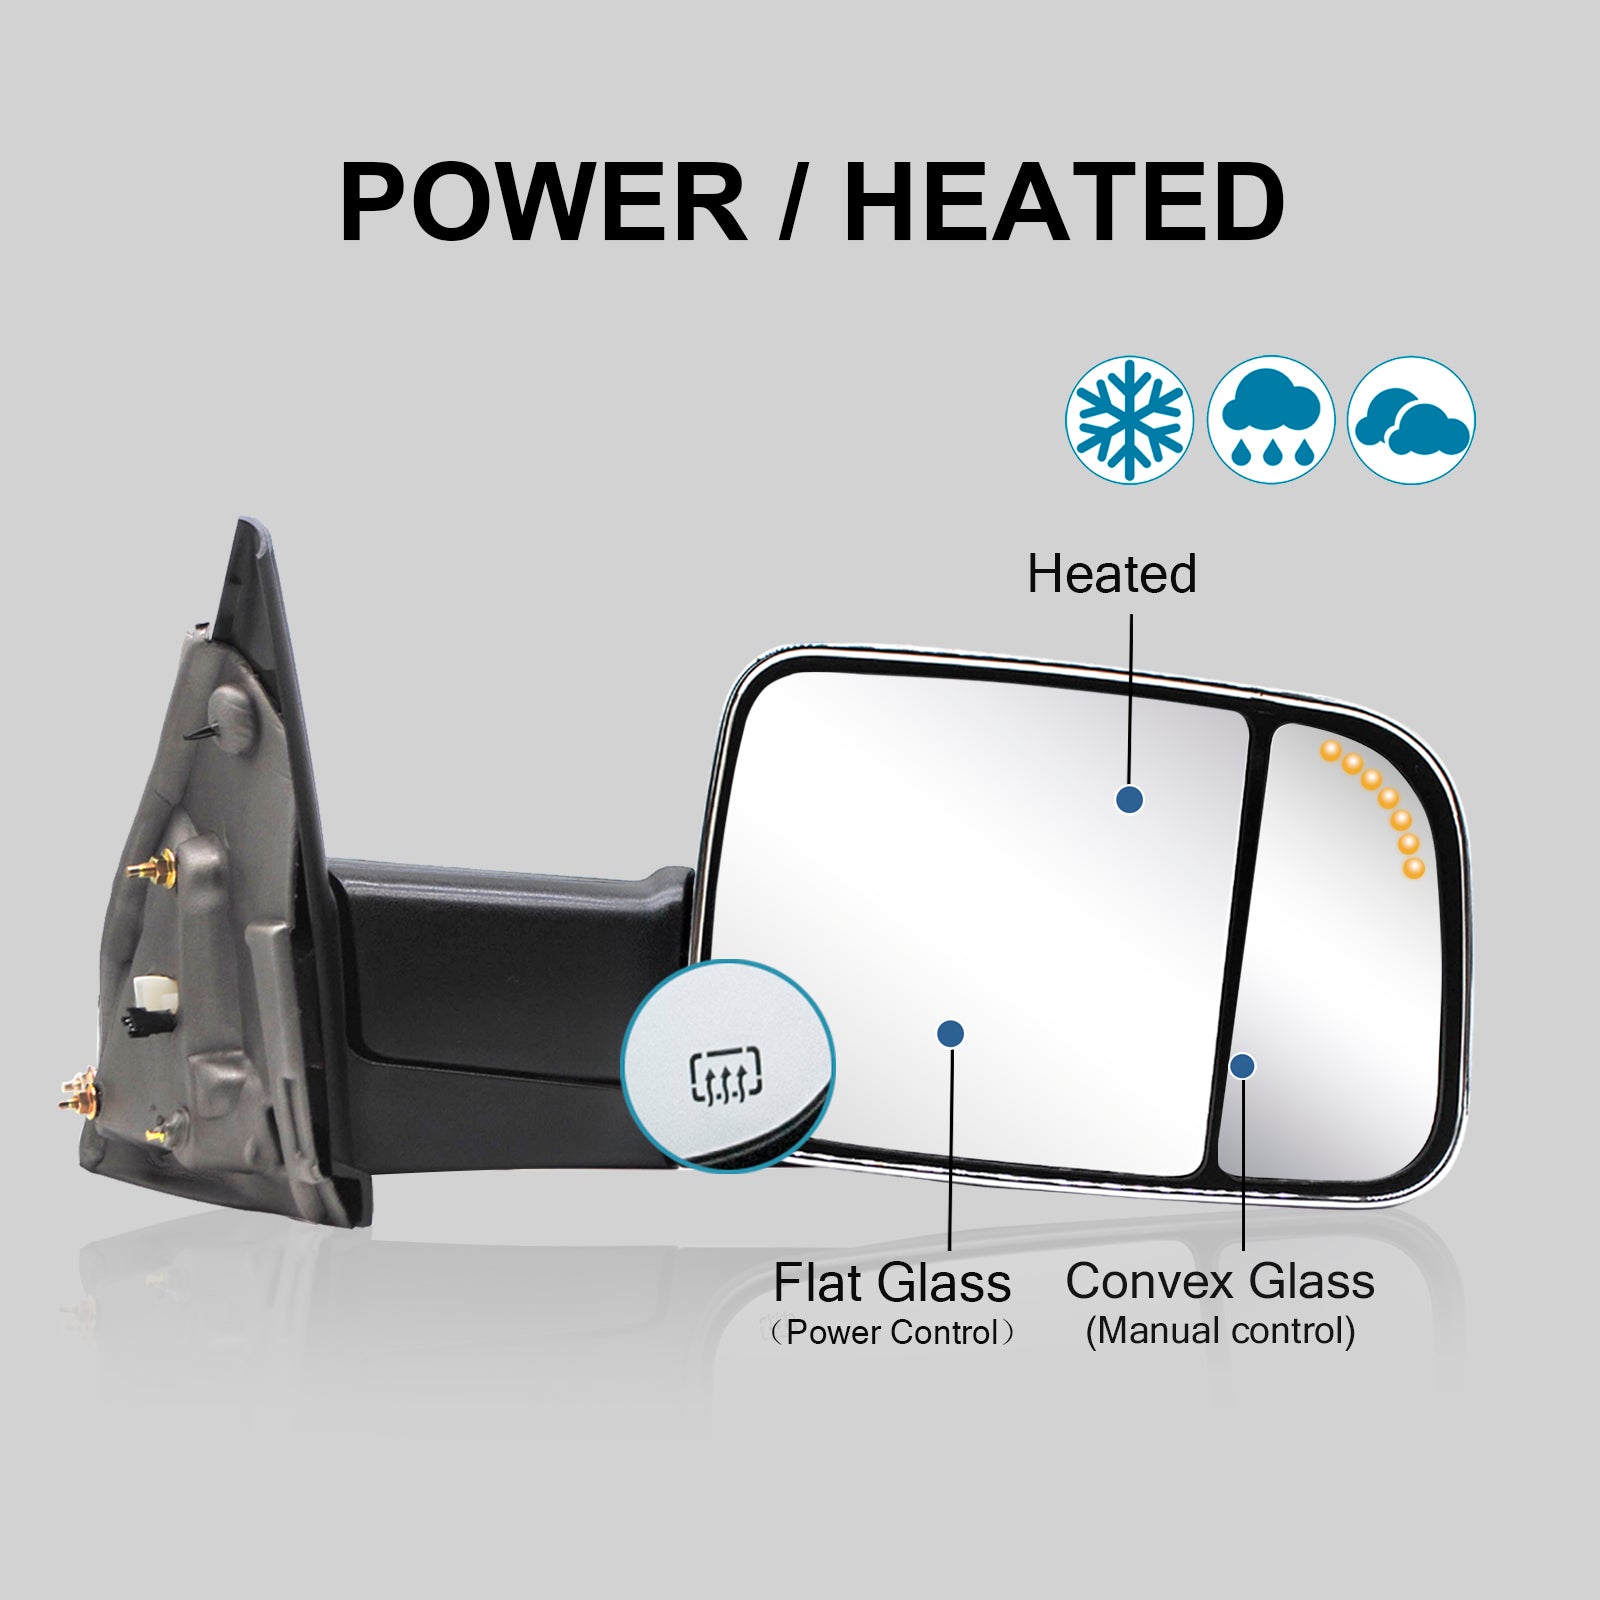 Towing Mirrors for 2002-2008 Dodge Ram 1500, 2003-2009 Dodge Ram 2500/3500 Pickup Truck, Power Heated Puddle Light Arrow Signal on Glass Manual Folding, Chrome Cap 9C